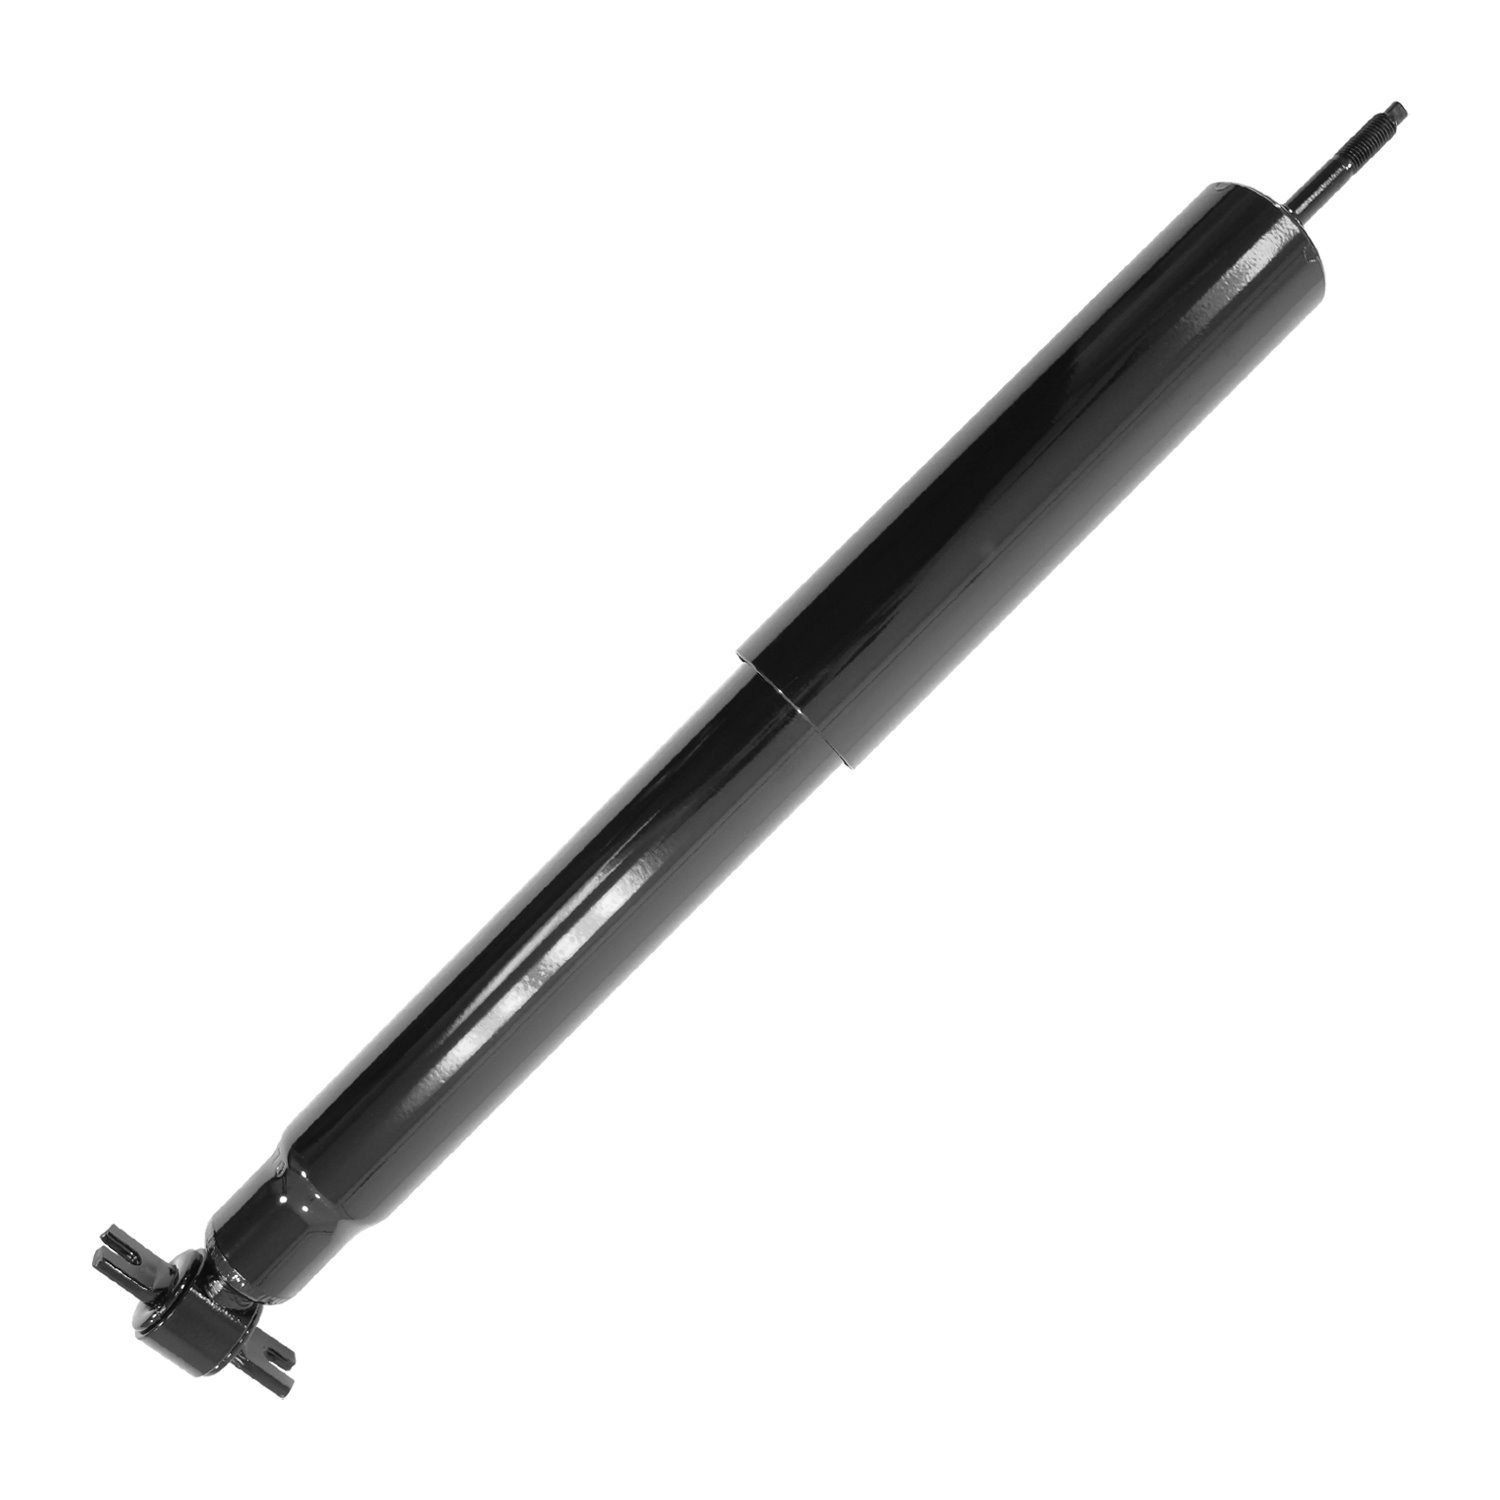 213170 Gas Charged Shock Absorber Fits Select Jeep Wrangler, Jeep TJ